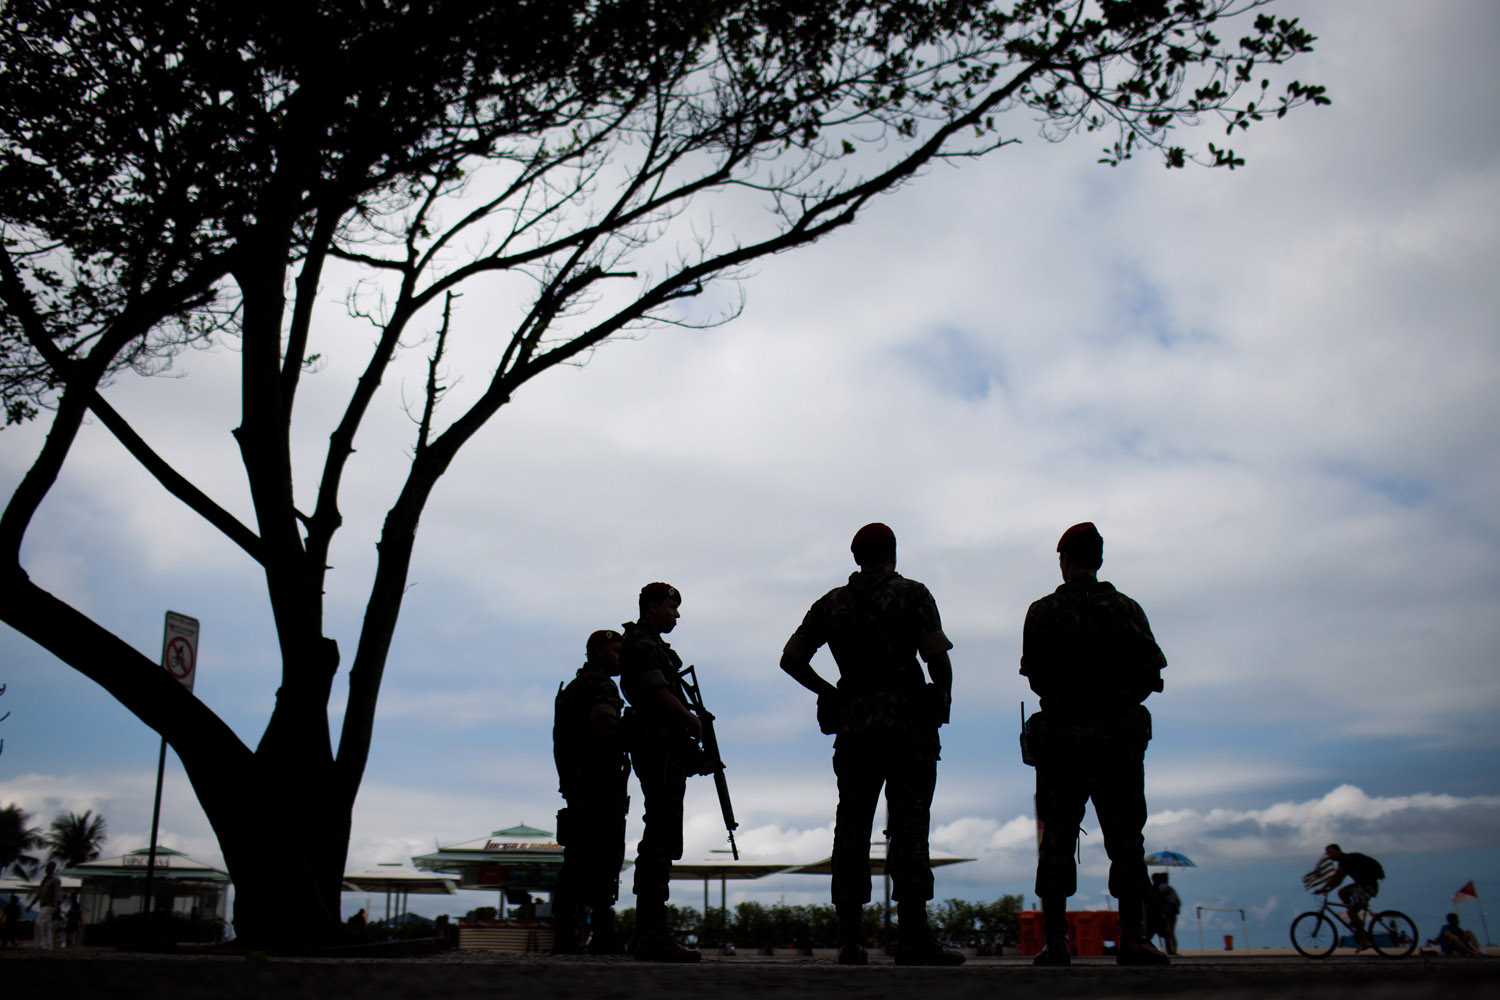 June 12, 2012. Brazil Army soldiers patrol along the nearby shores Copacabana beach ahead of the Rio+20 United Nations Conference on Sustainable Development, in Rio de Janeiro.